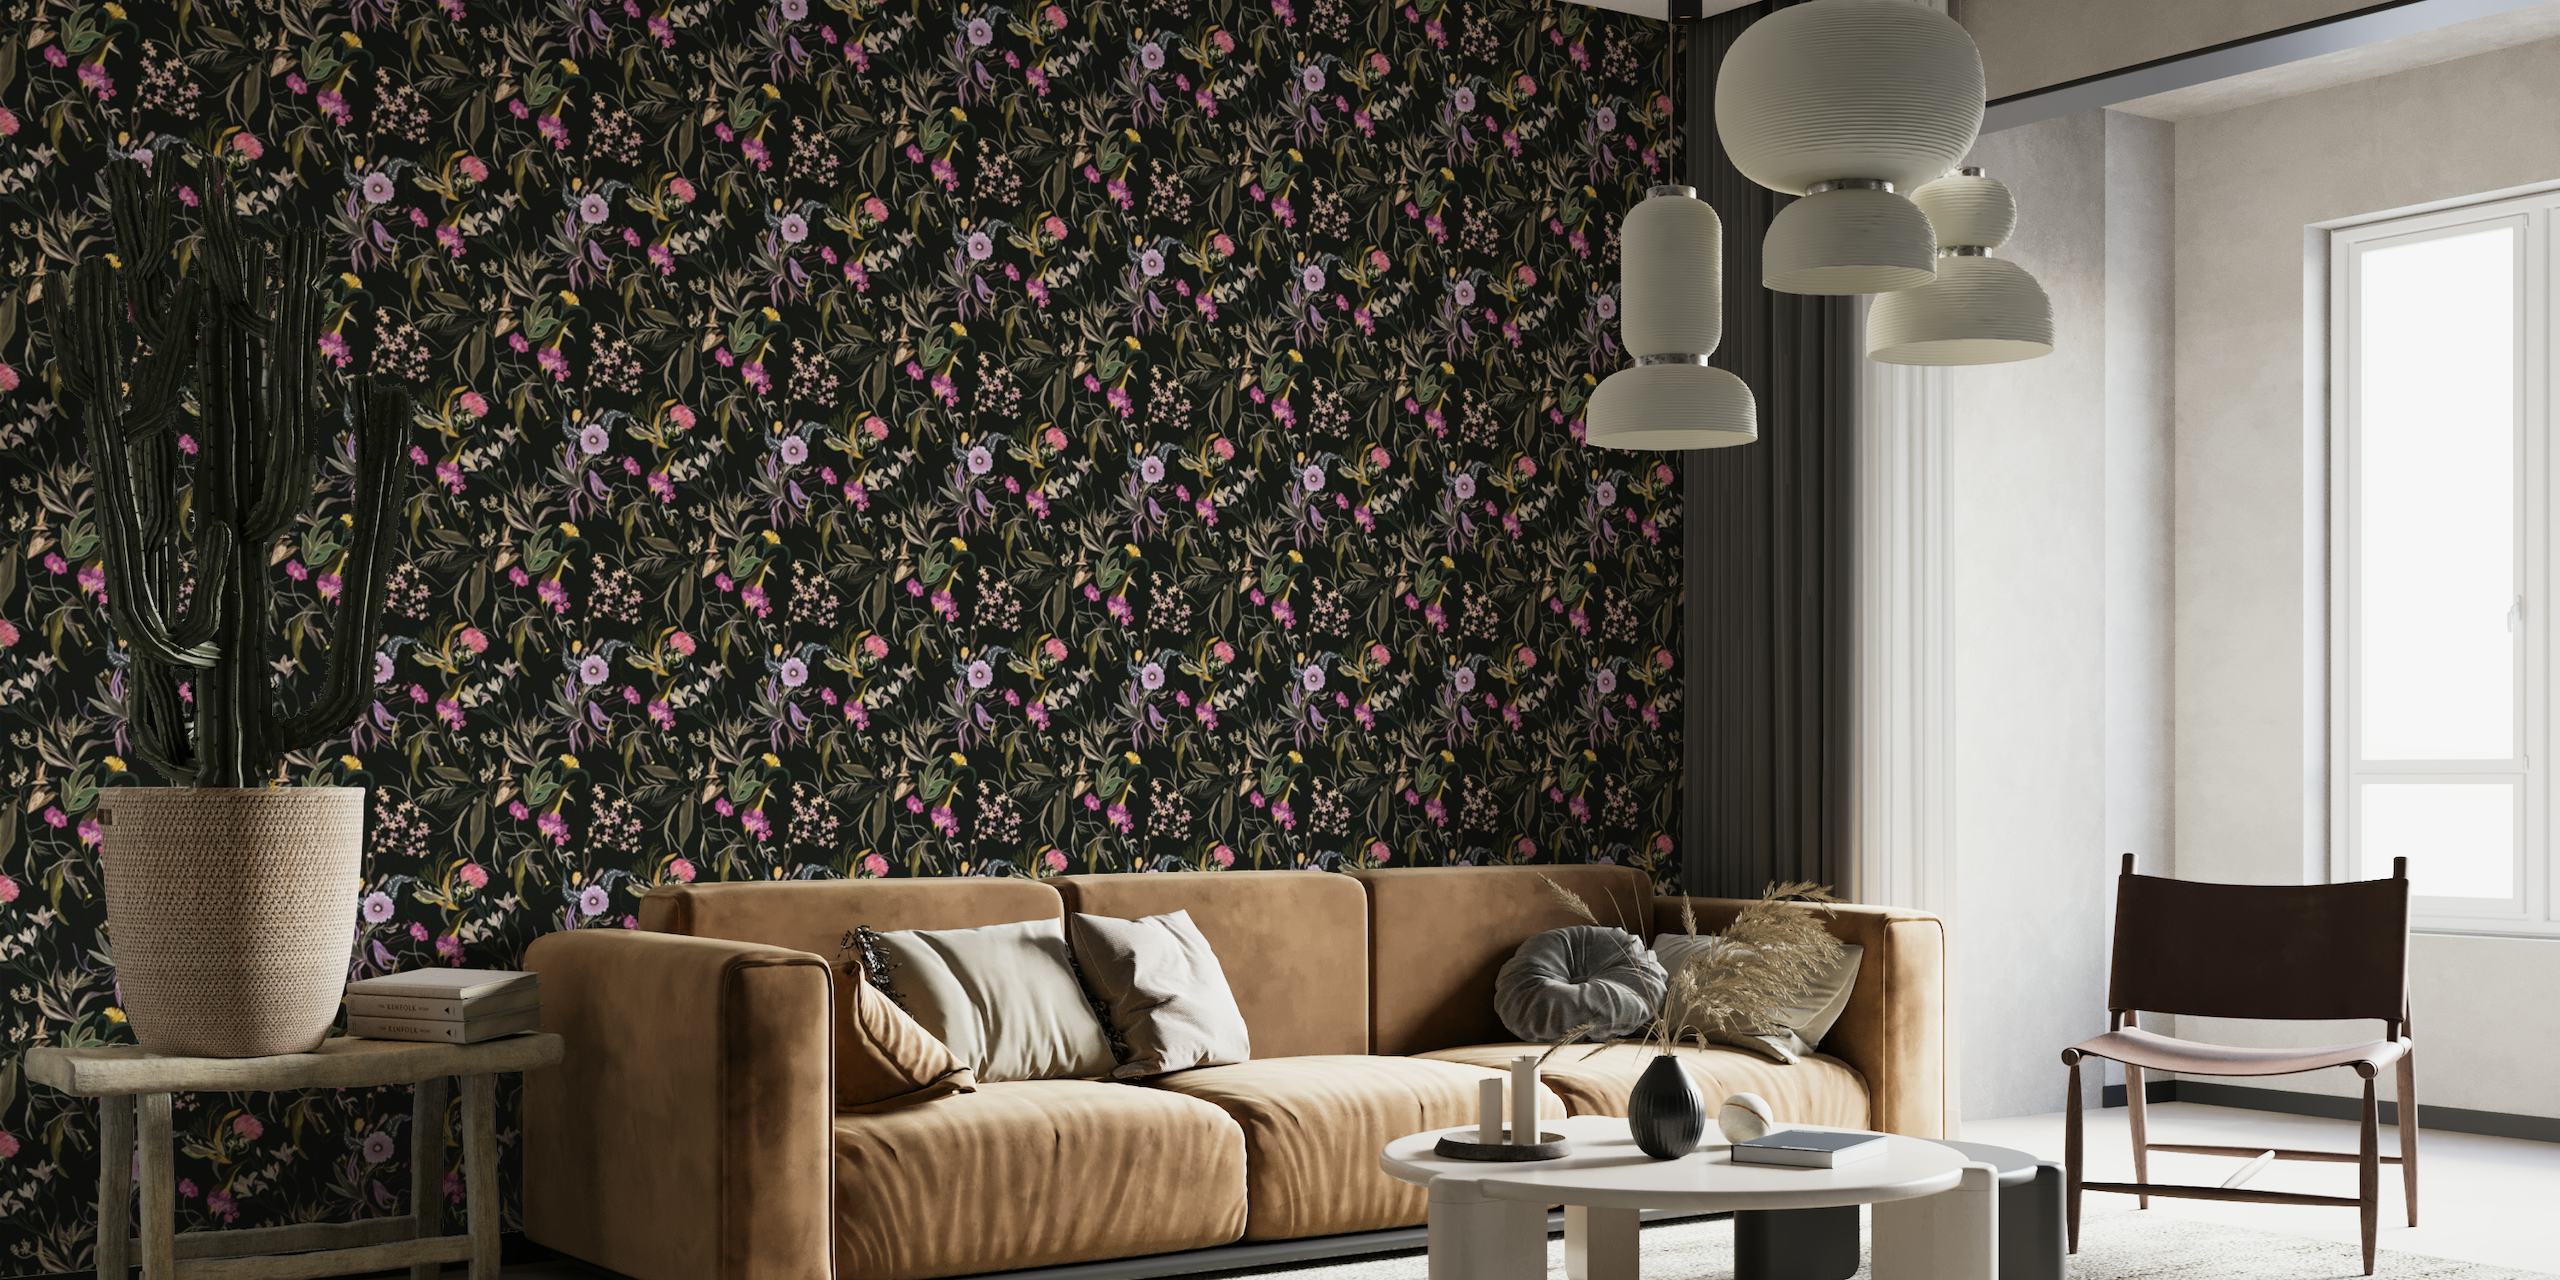 Elegant Romanesque floral pattern wall mural with blooming flowers and foliage against a dark background